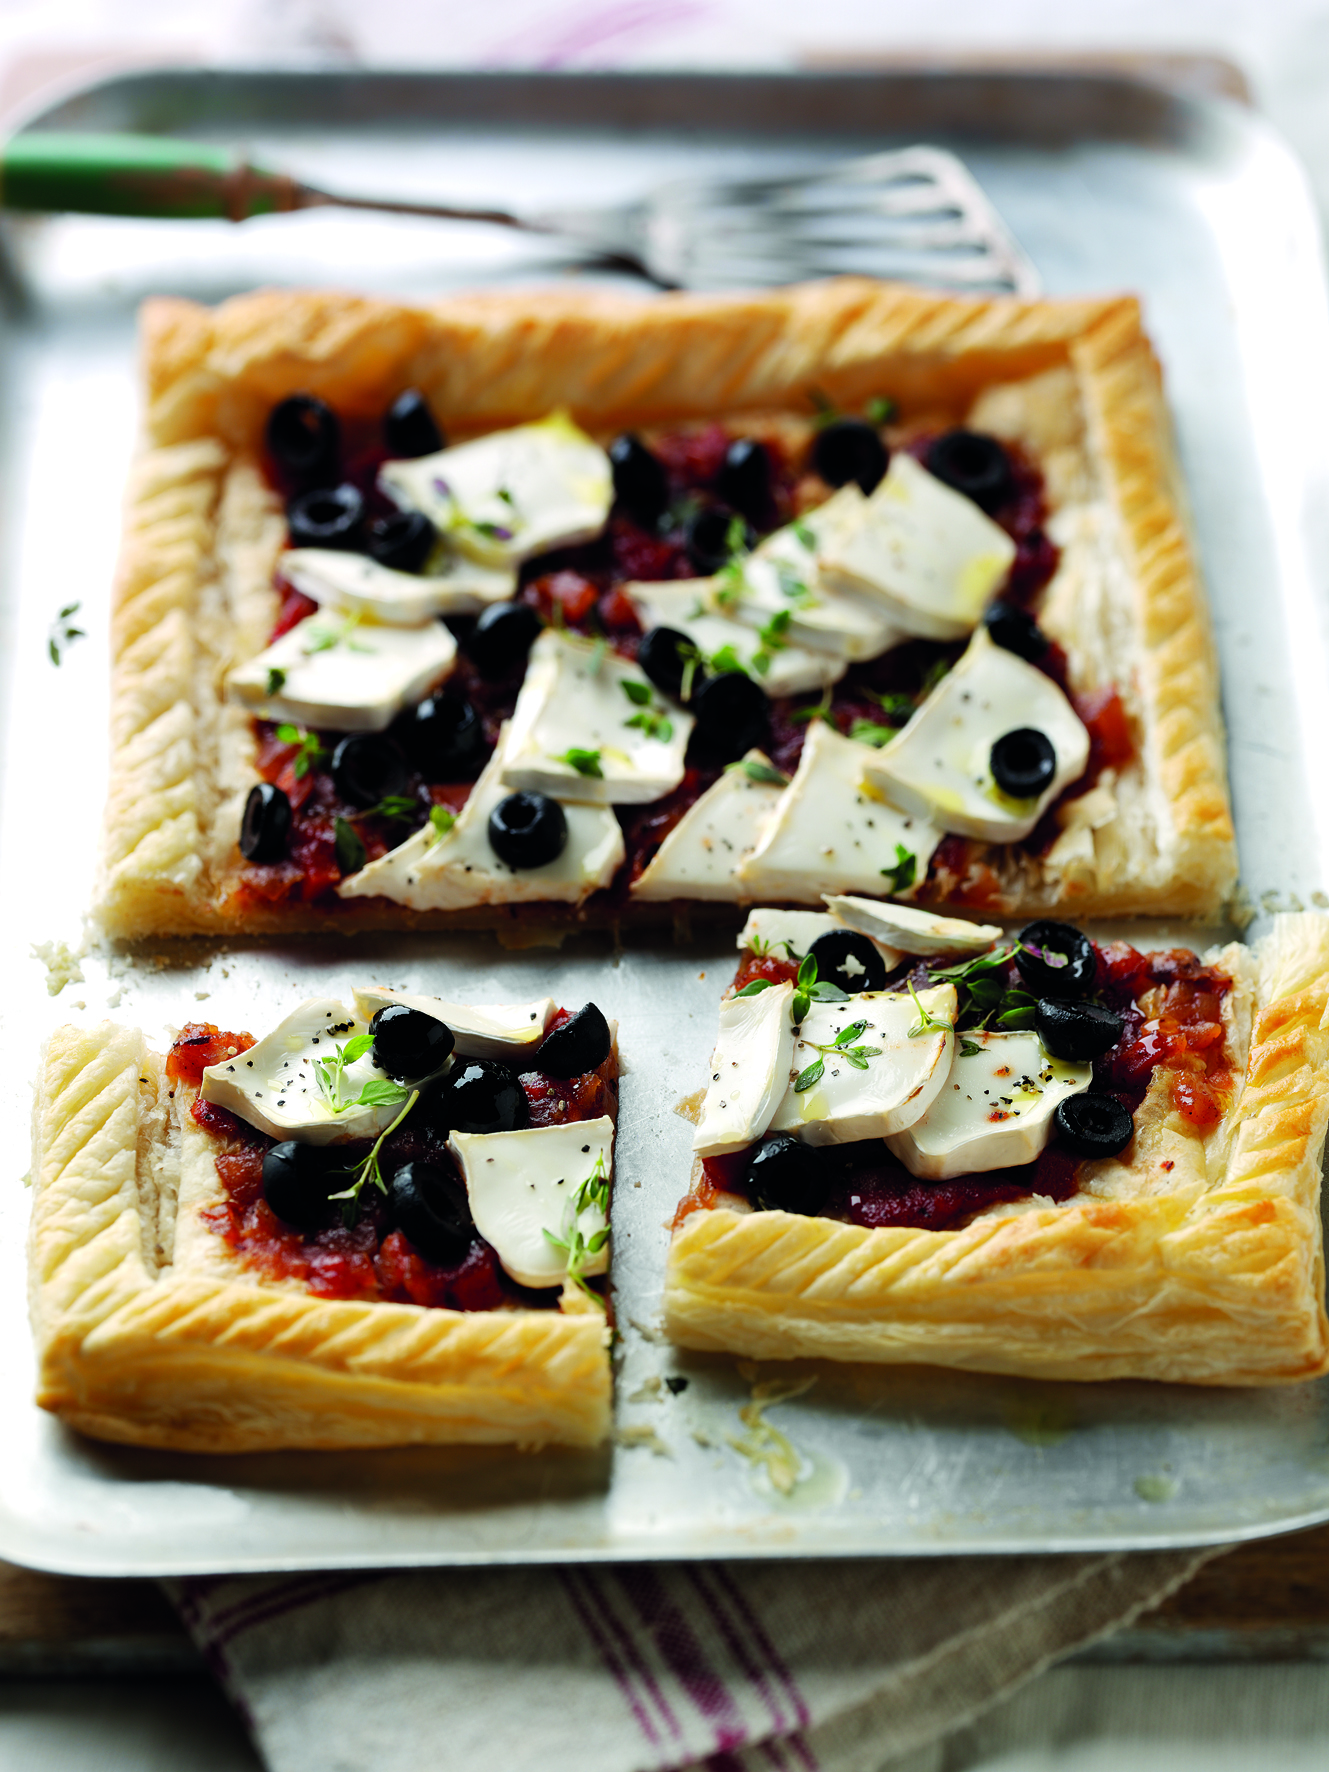 Goats Cheese and Puff Pastry Pizza with Tracklements Tomato Chutney